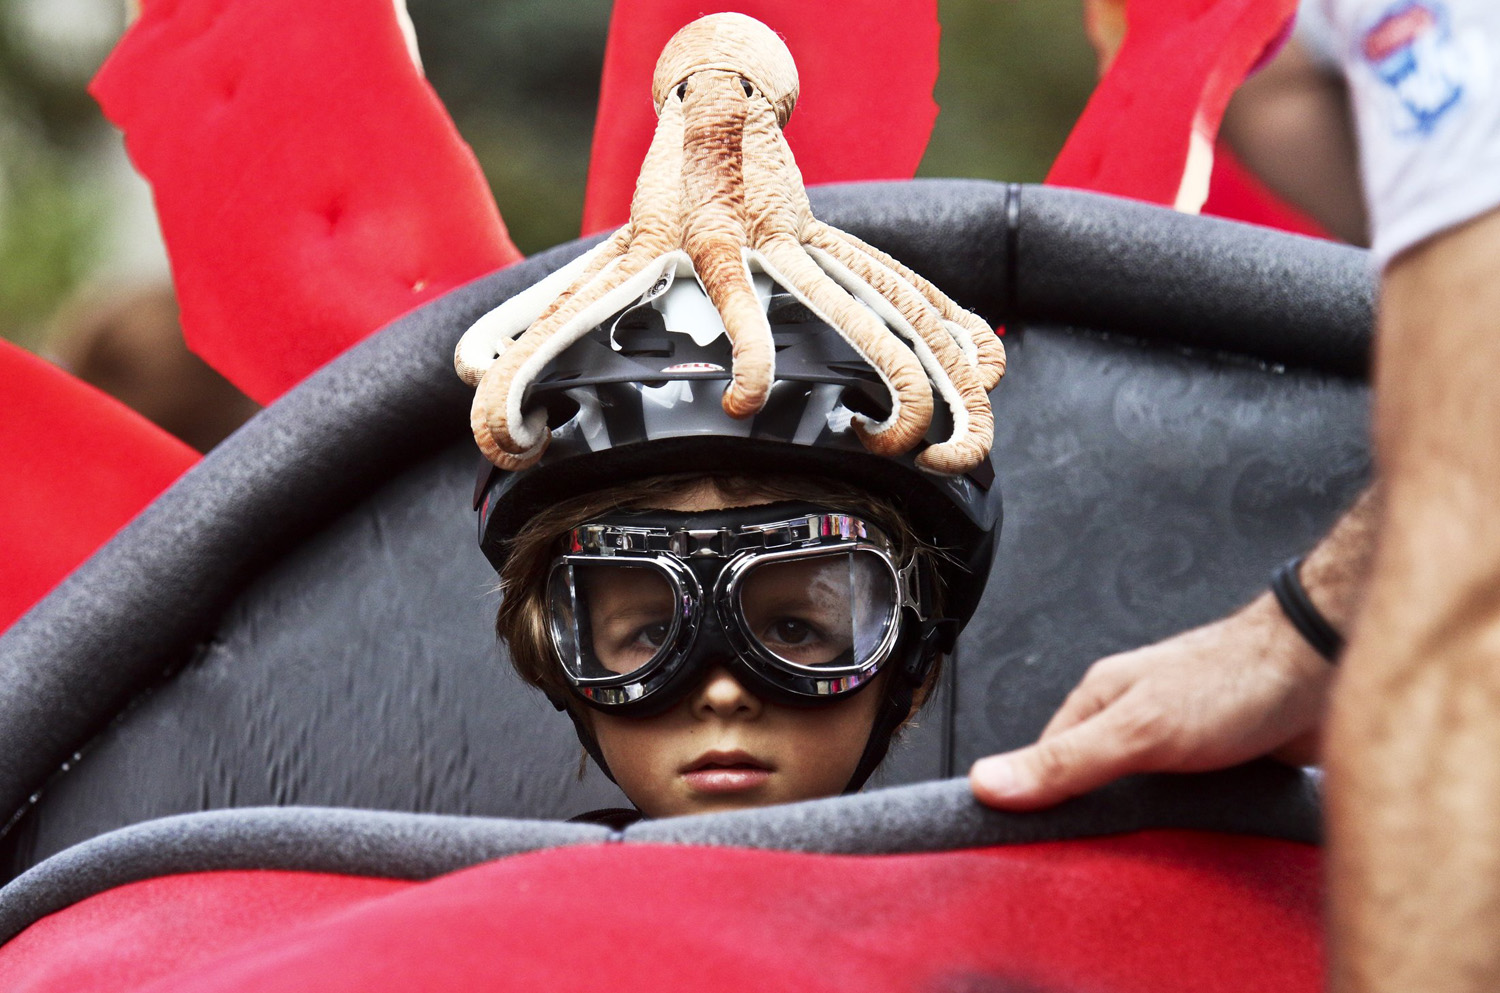 A child prepares for a run at the Madison Ave. Soapbox Derby in Decatur, Ga. on Sept. 27, 2014.